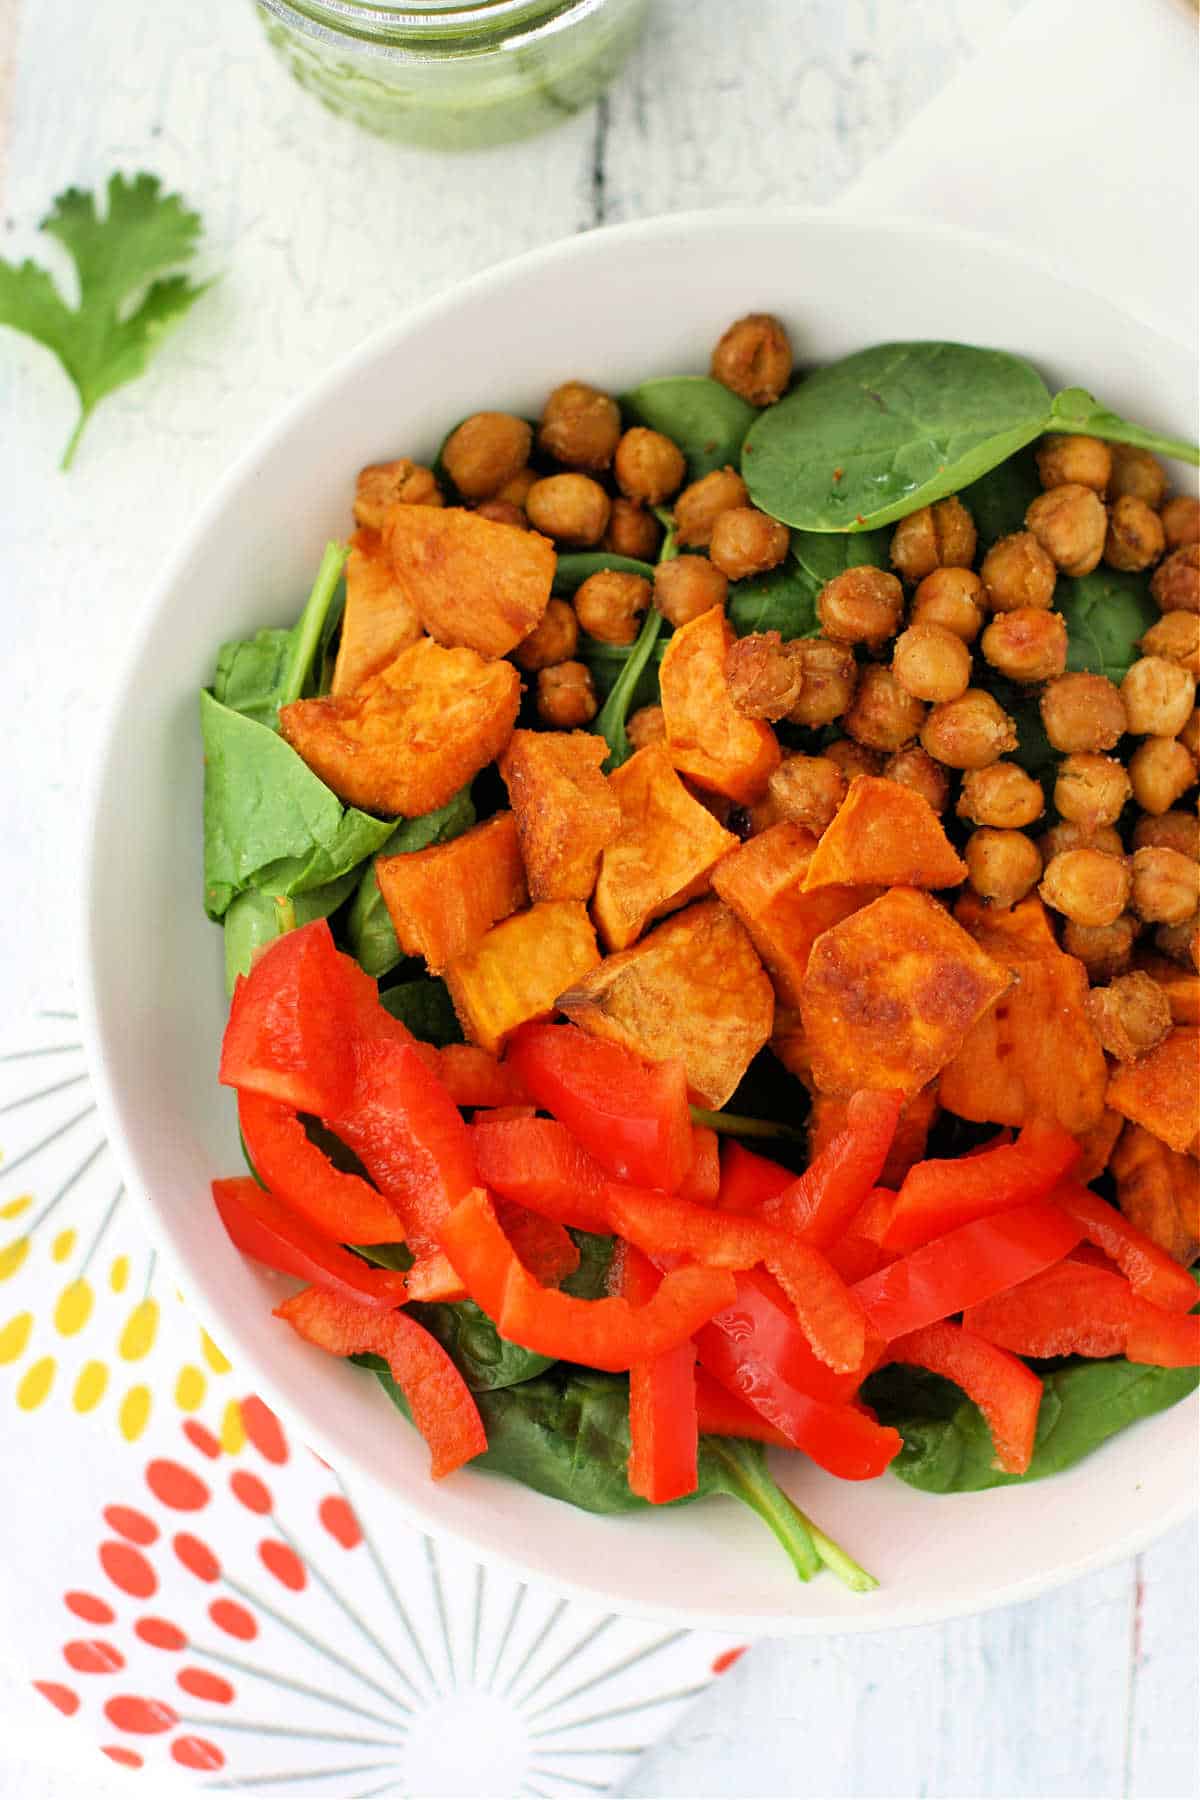 spinach salad with roasted chickpeas and sweet potatoes